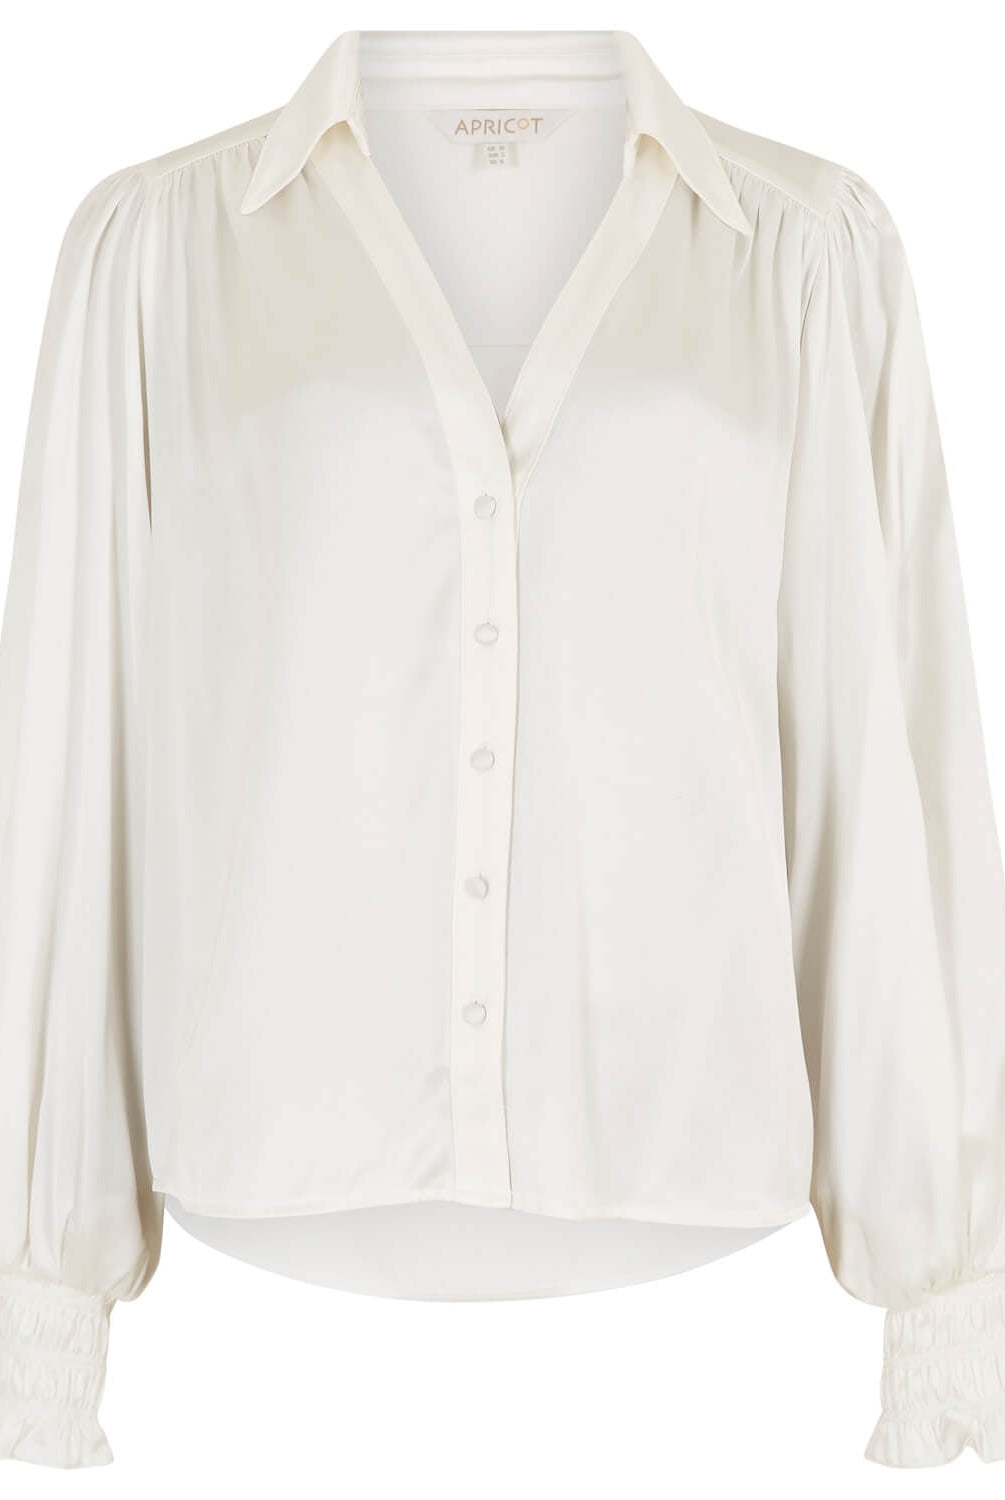 Off White Blouse Work Top Apex Ethical Boutique